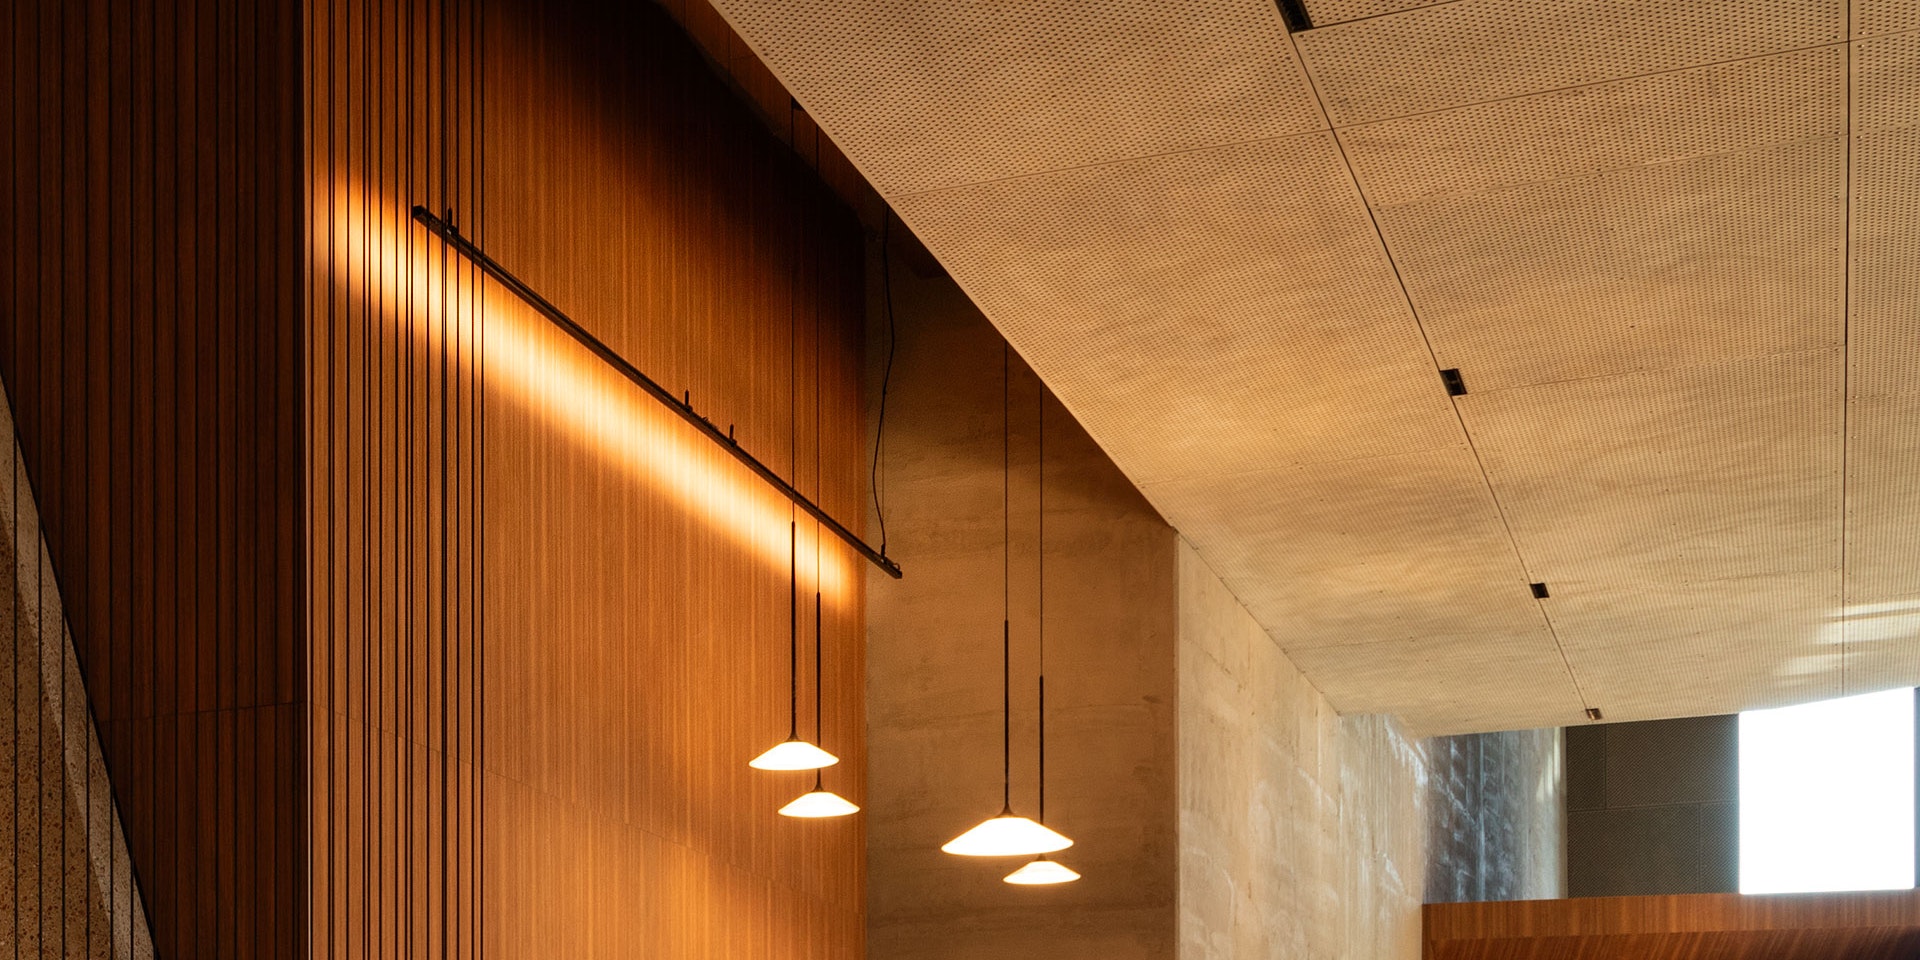 Forma compact, low-voltage LED Luminaire in application, installed in the Melbourne Conservatorium of Music. 